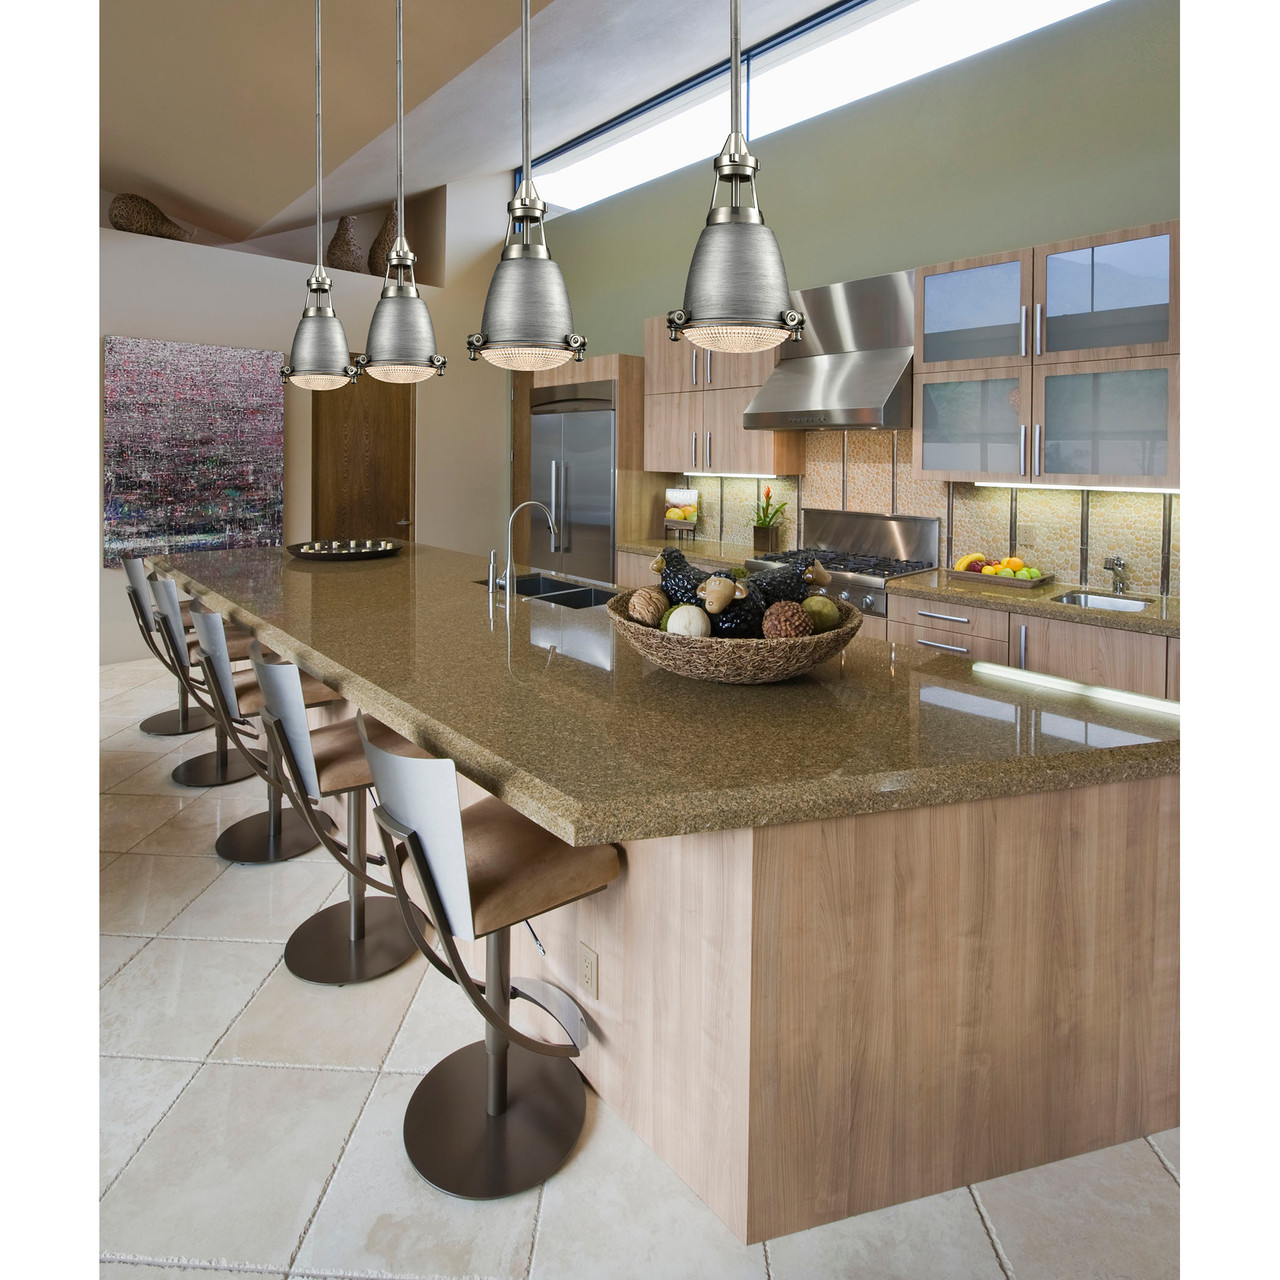 ELK LIGHTING 65283/1 Sylvester 1 Light Pendant In Weathered Zinc And Satin Nickel With Halophane Glass Diffuser